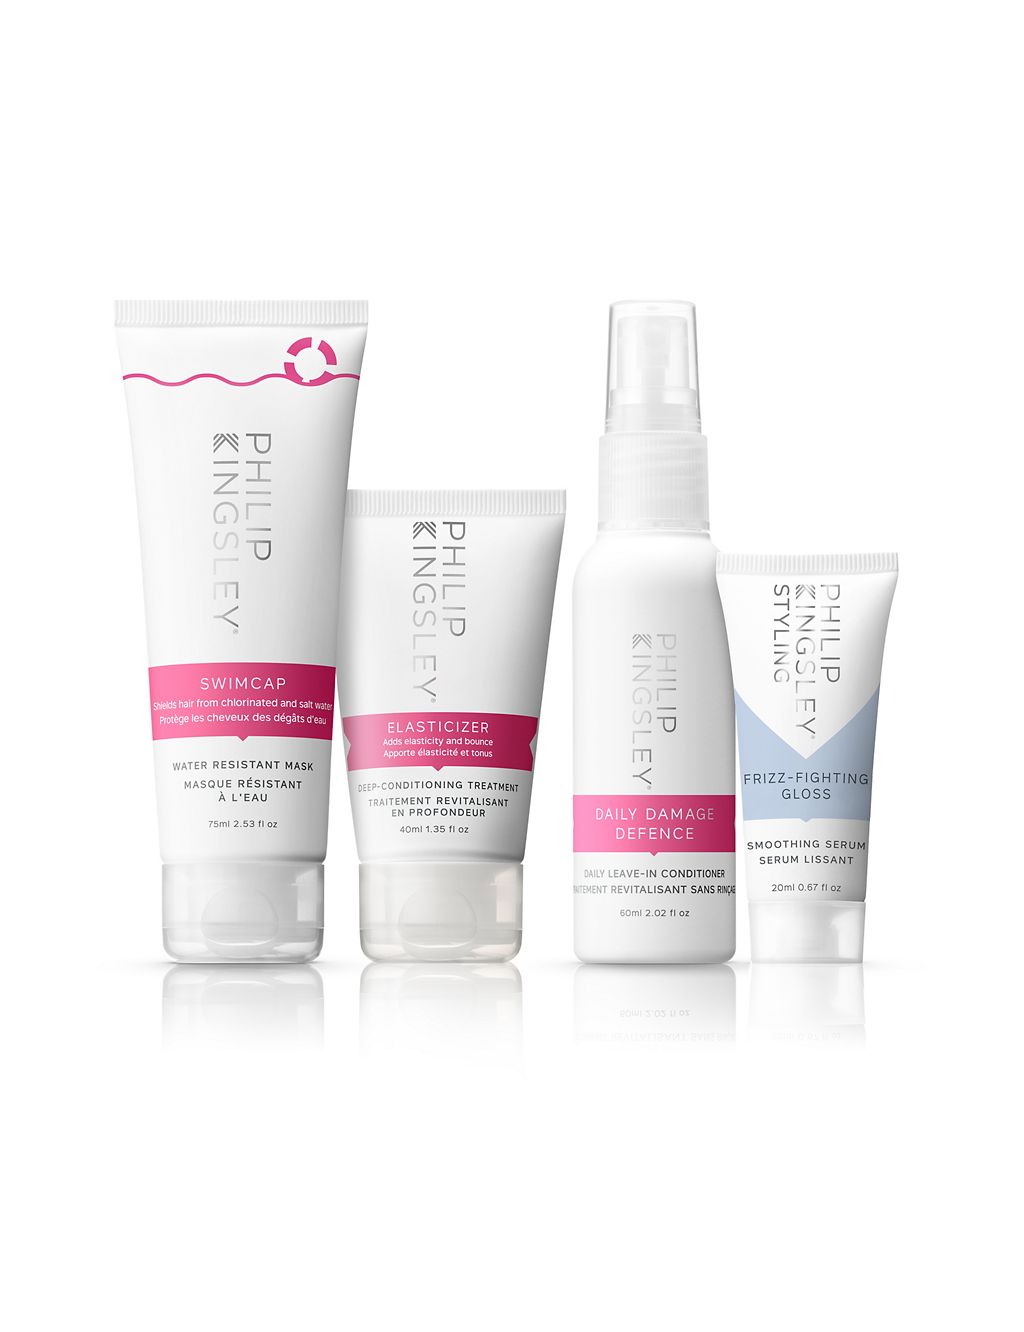 Holiday-Proof Hair Care Travel Collection 2 of 3